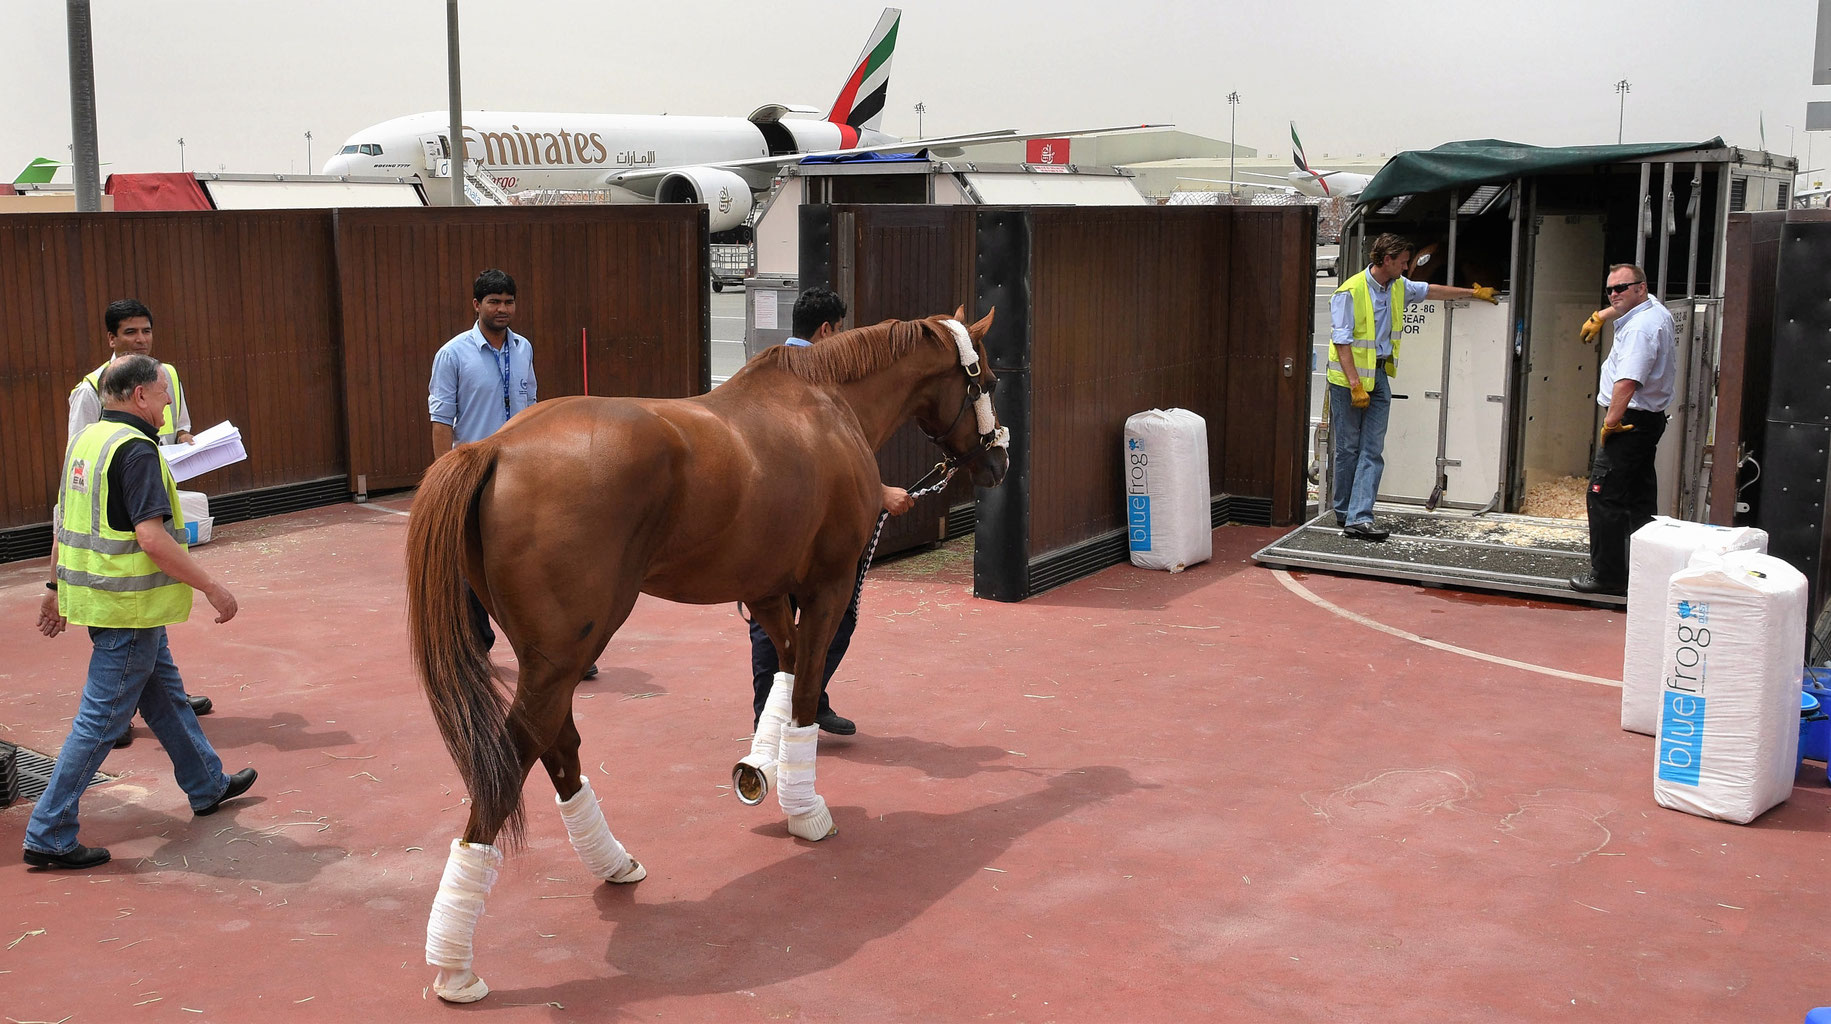 The world’s largest commercial air charter of horses | Emirates SkyCargo